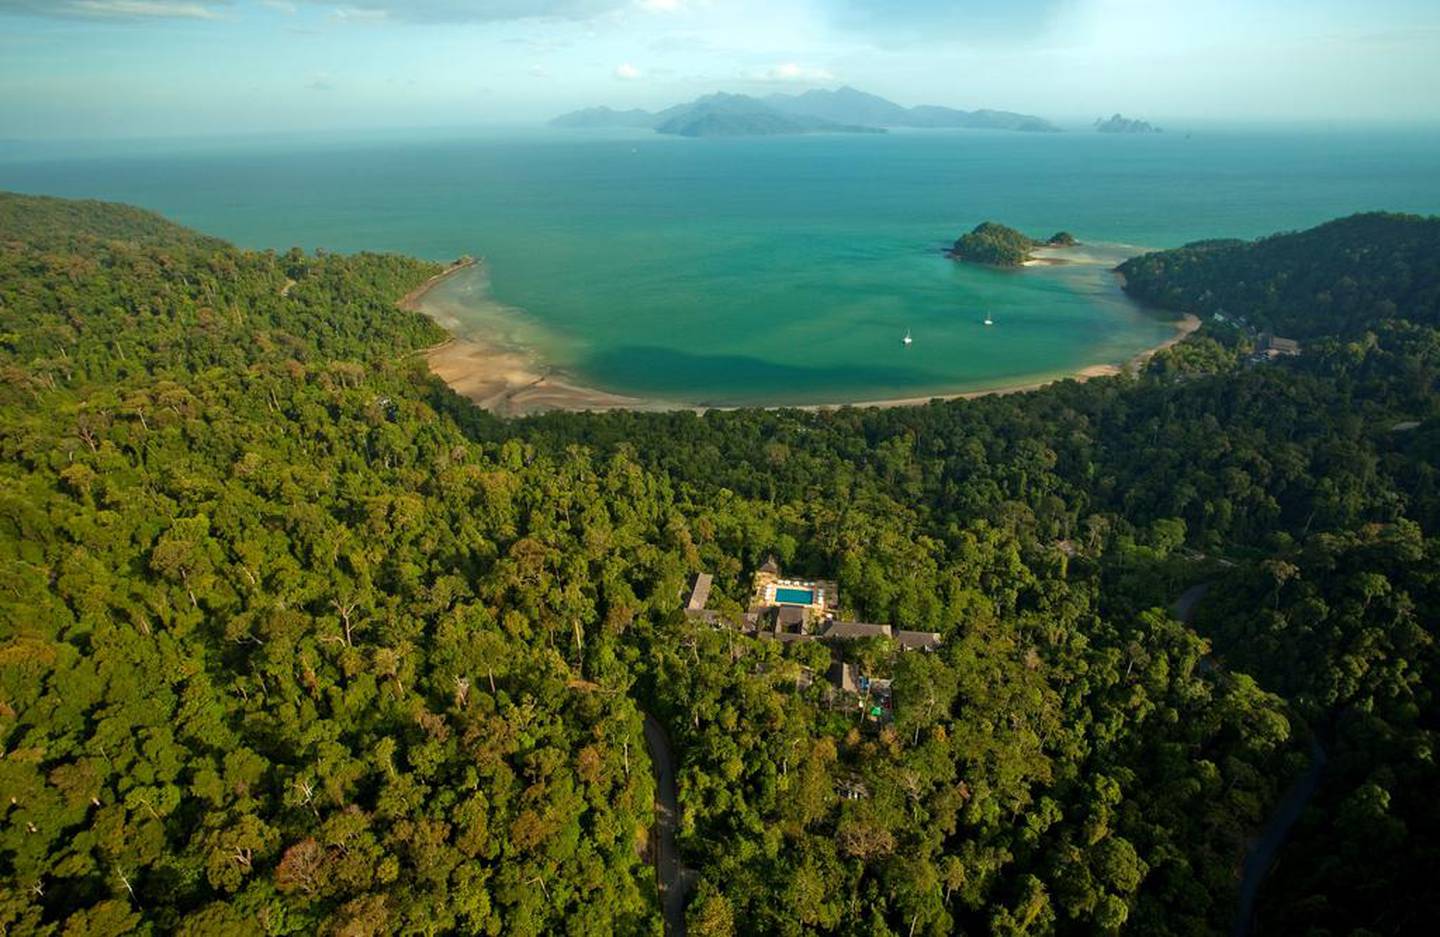 Malaysia's Langkawi offers unlimited nature, pristine beaches and a thriving halal culinary scene. Photo: The Datai Langkawi